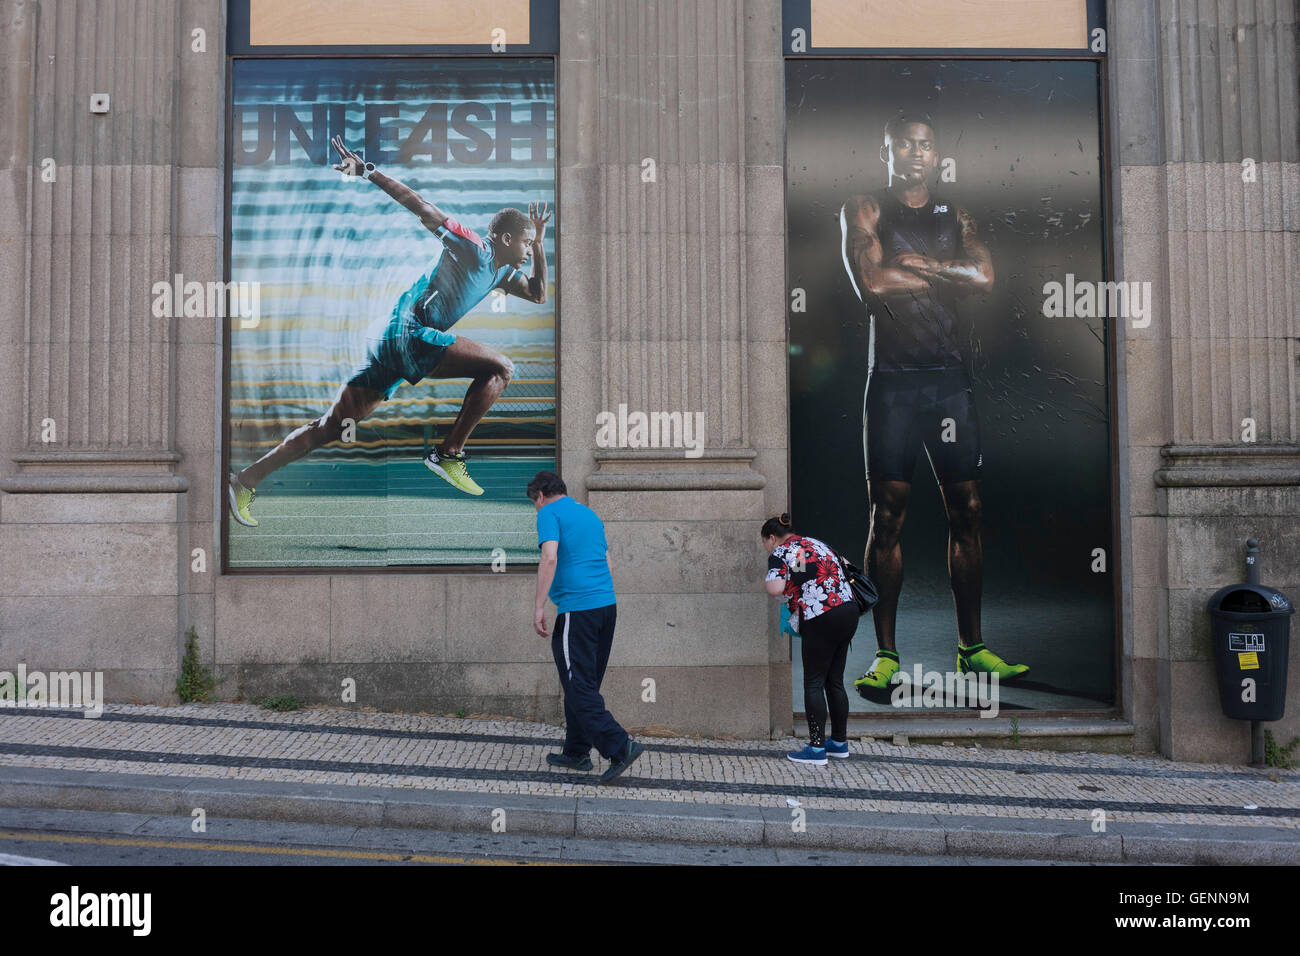 Two locals cough together beneath ad posters for sportswear outside a  sports shop in Porto, Portugal Stock Photo - Alamy